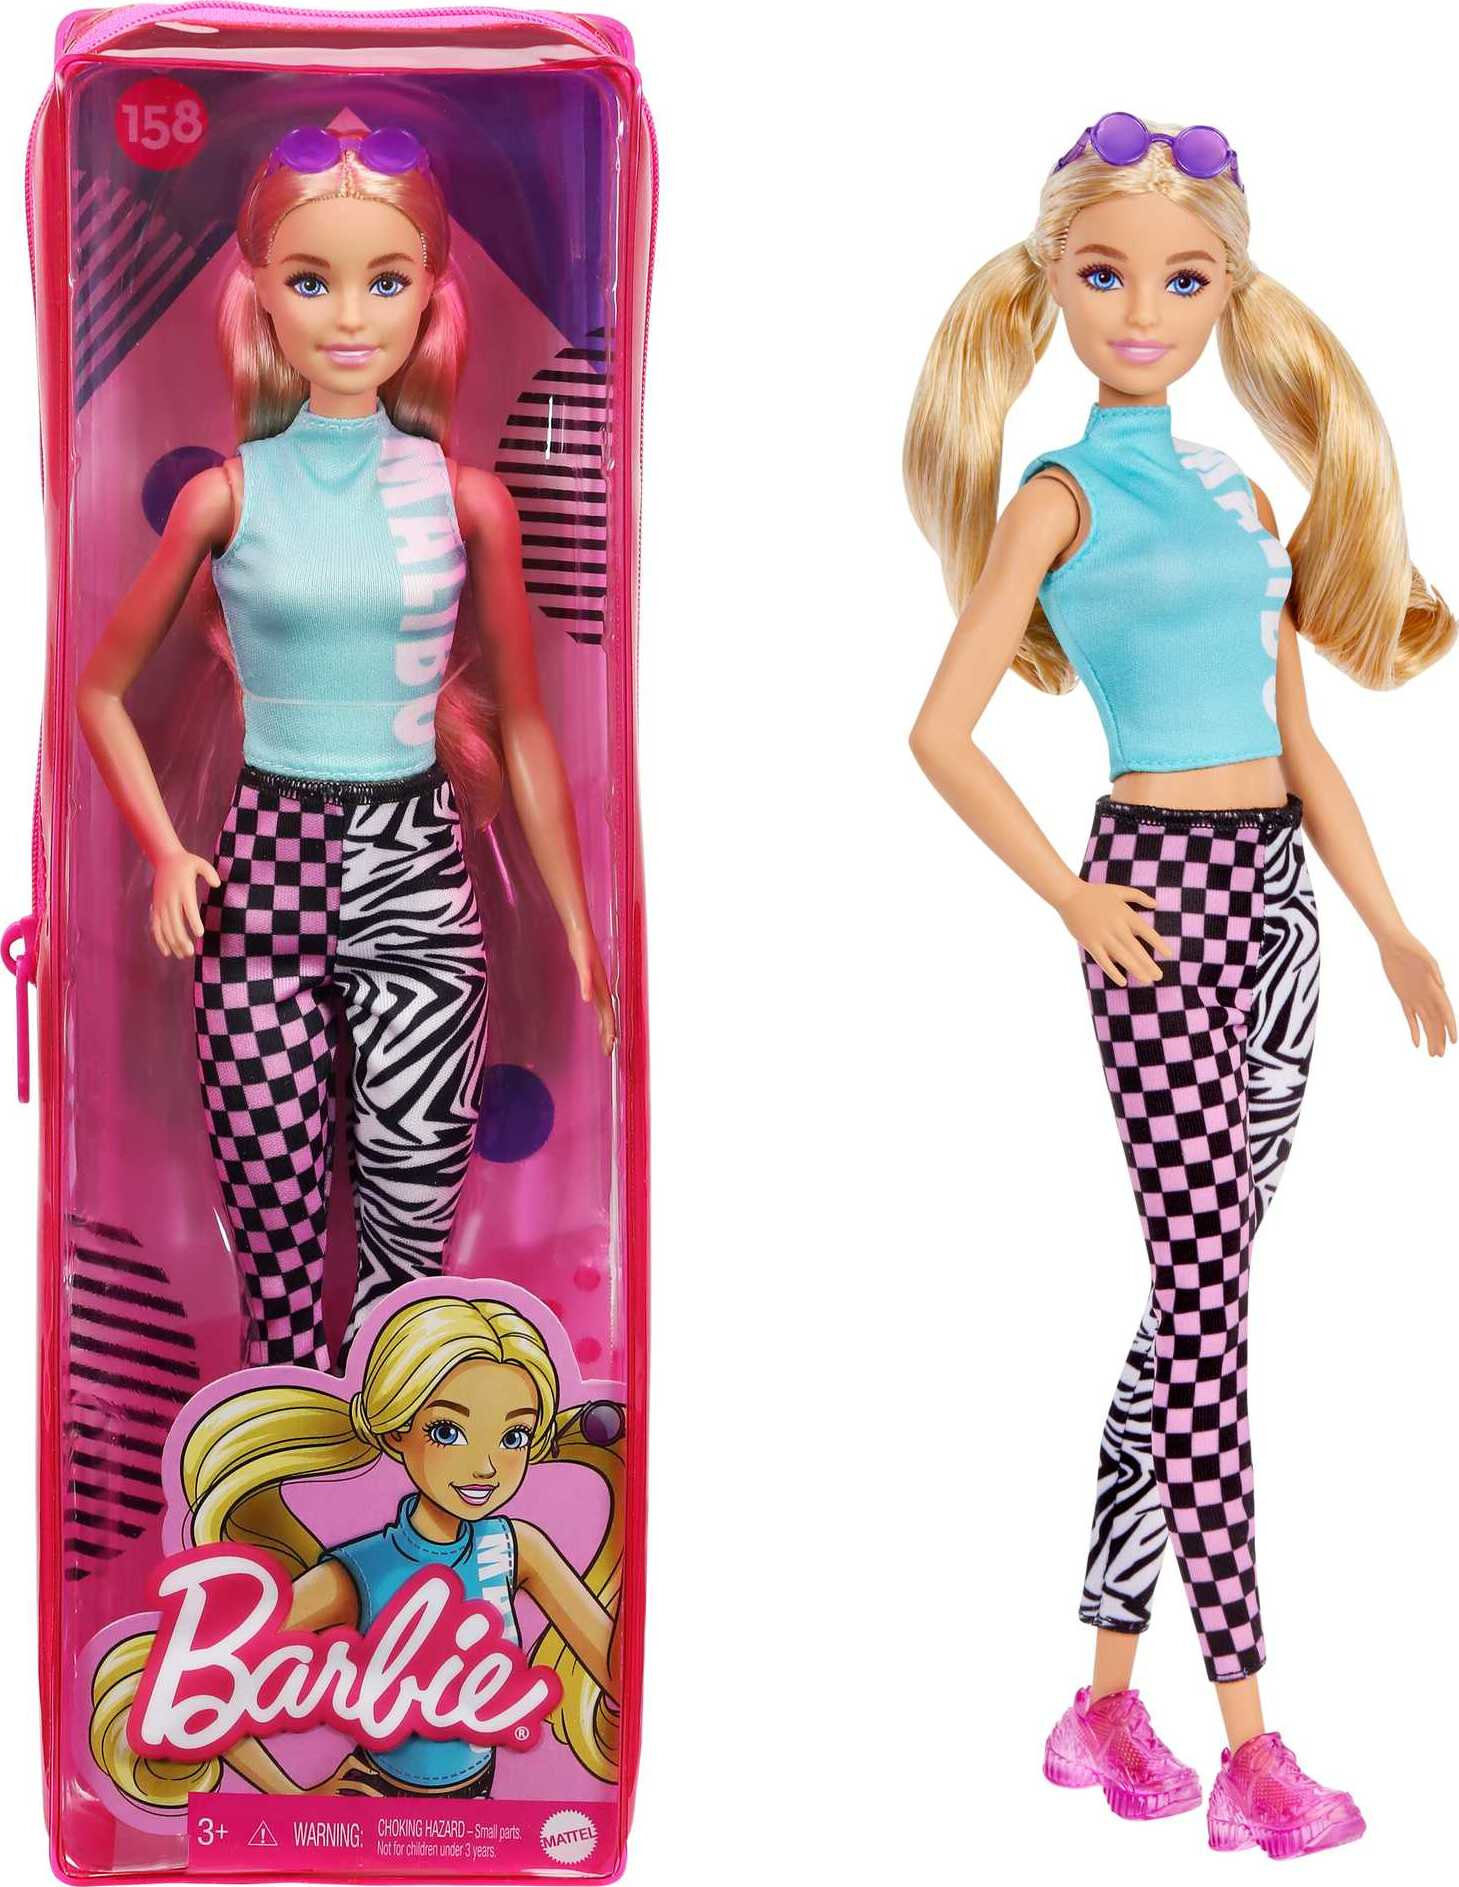 Barbie Fashionistas Doll #158 in Teal Top & Leggings with Blonde Pigtails, Sneakers & Sunglasses - image 1 of 7